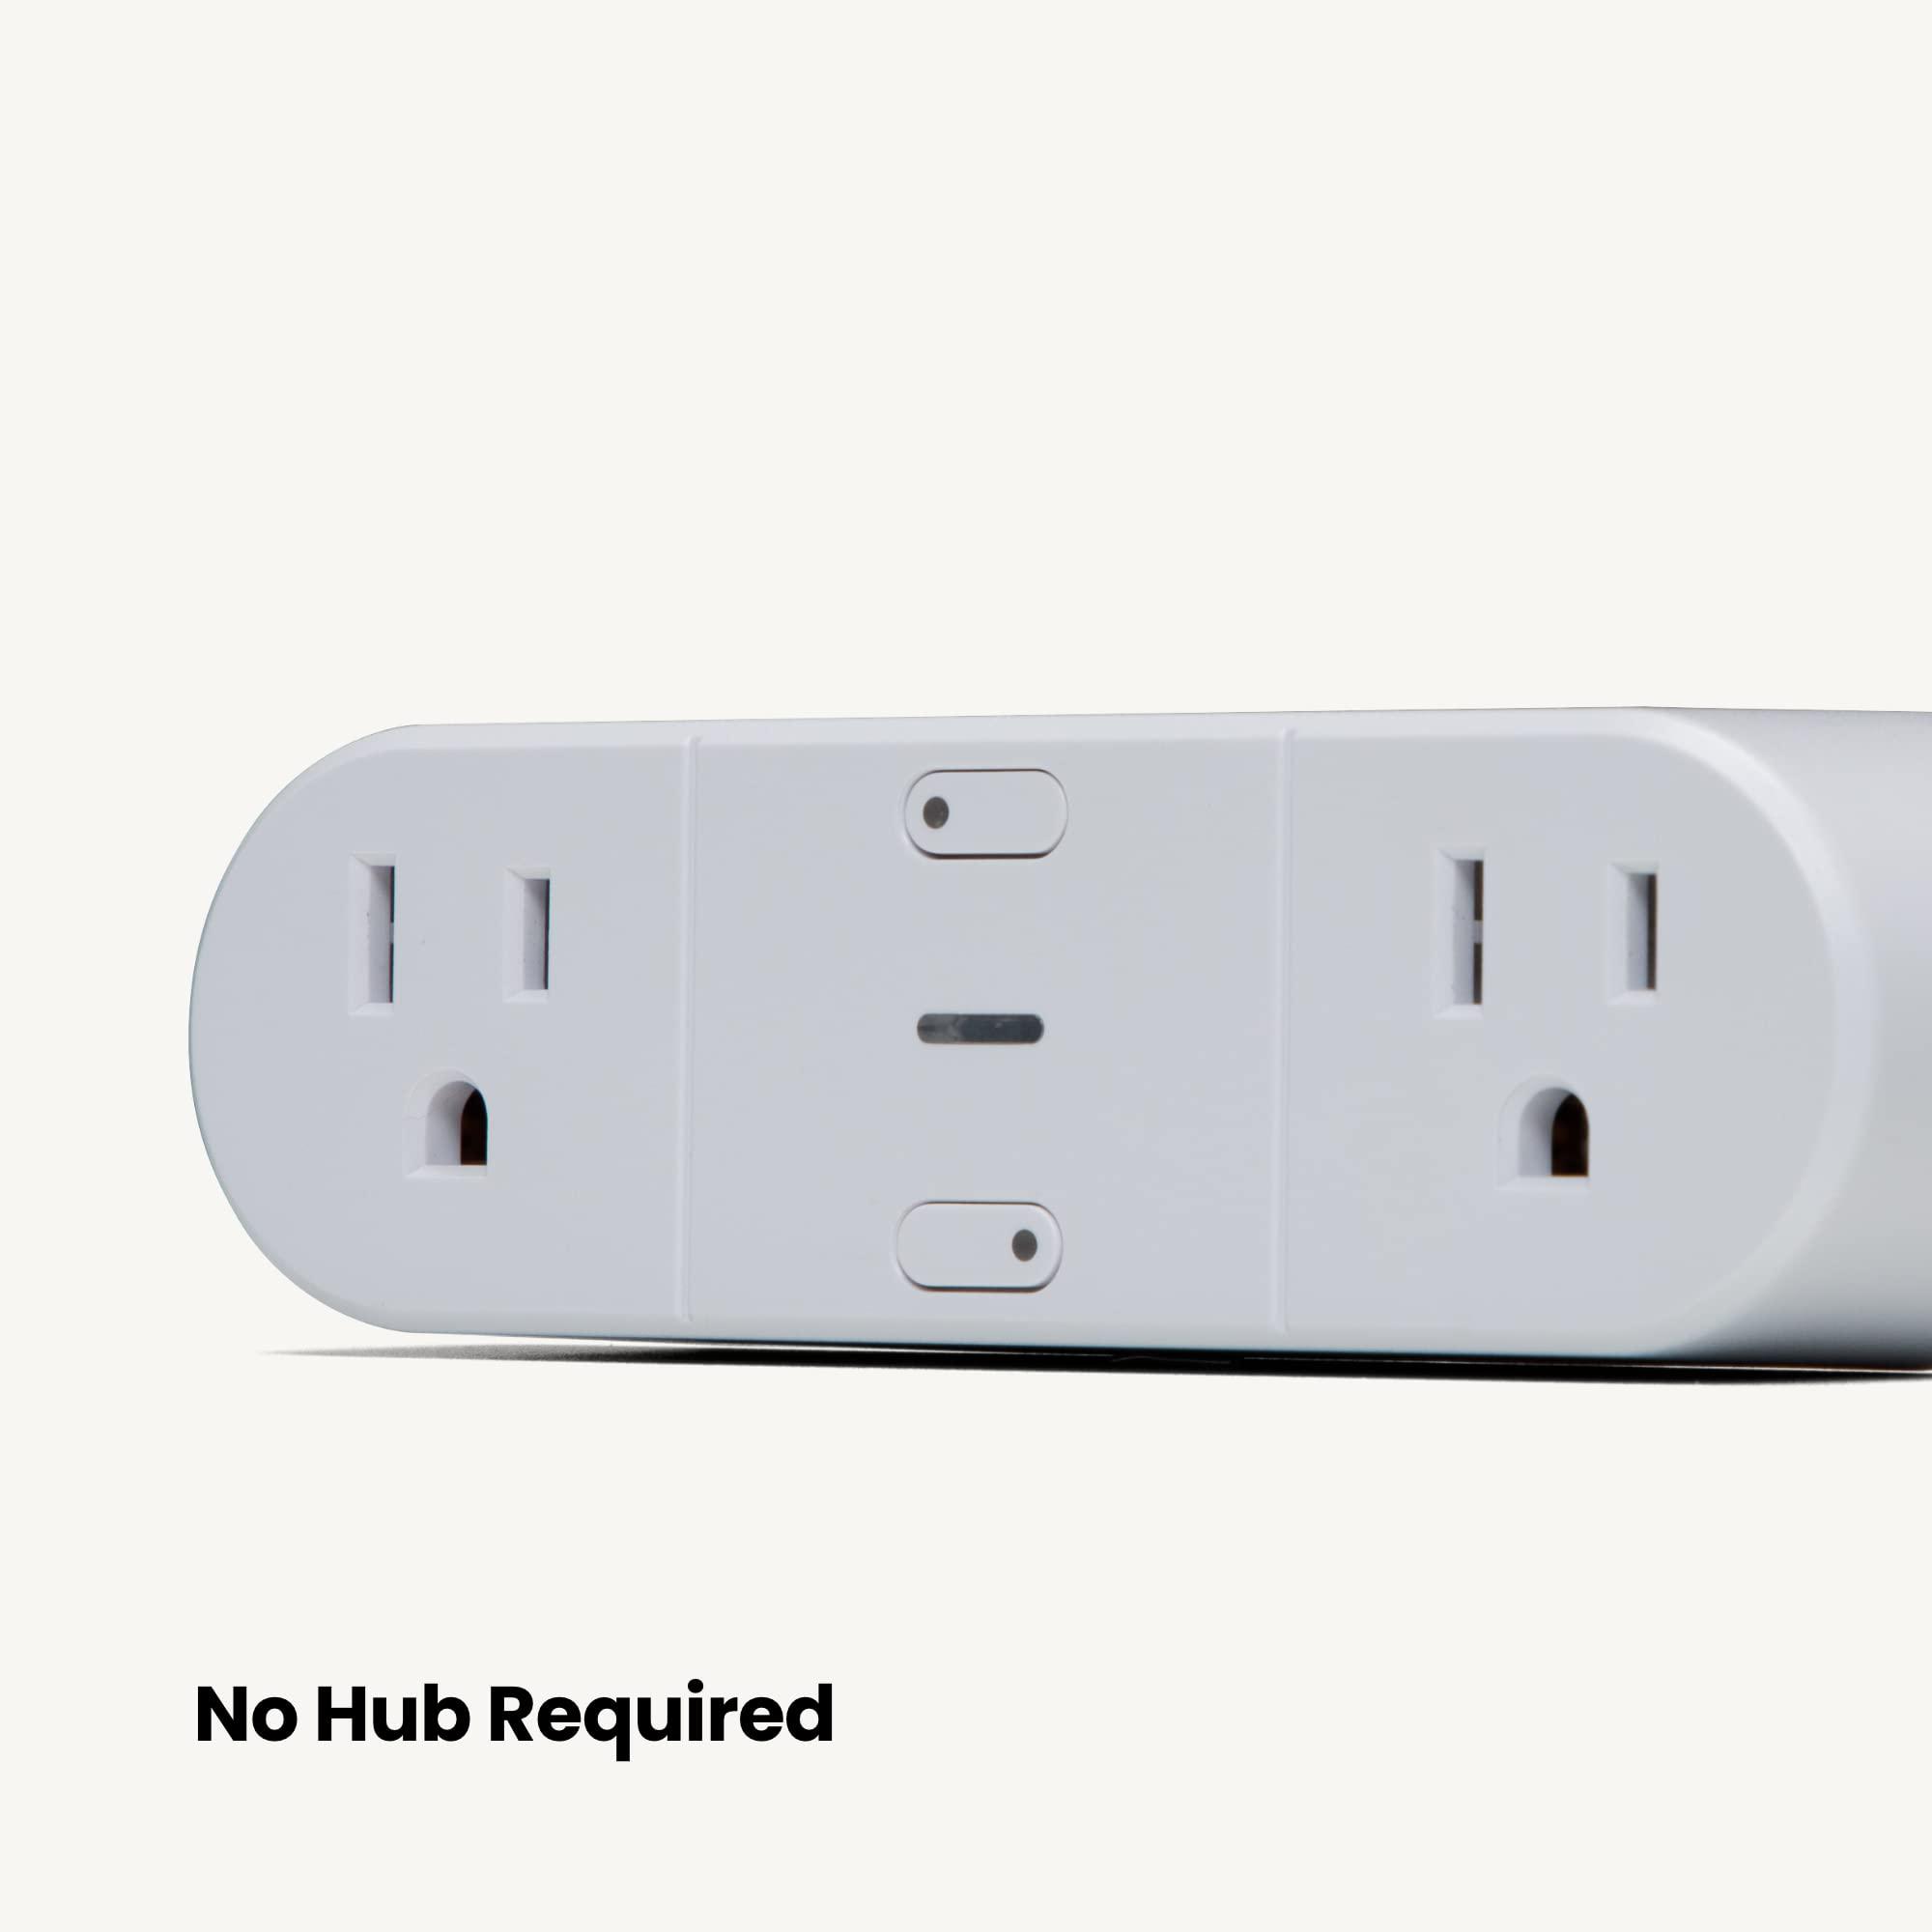 safety 1st connected dual smart outlet - wi-fi plug, no hub required, independently controllable outlets, timer & schedule, e